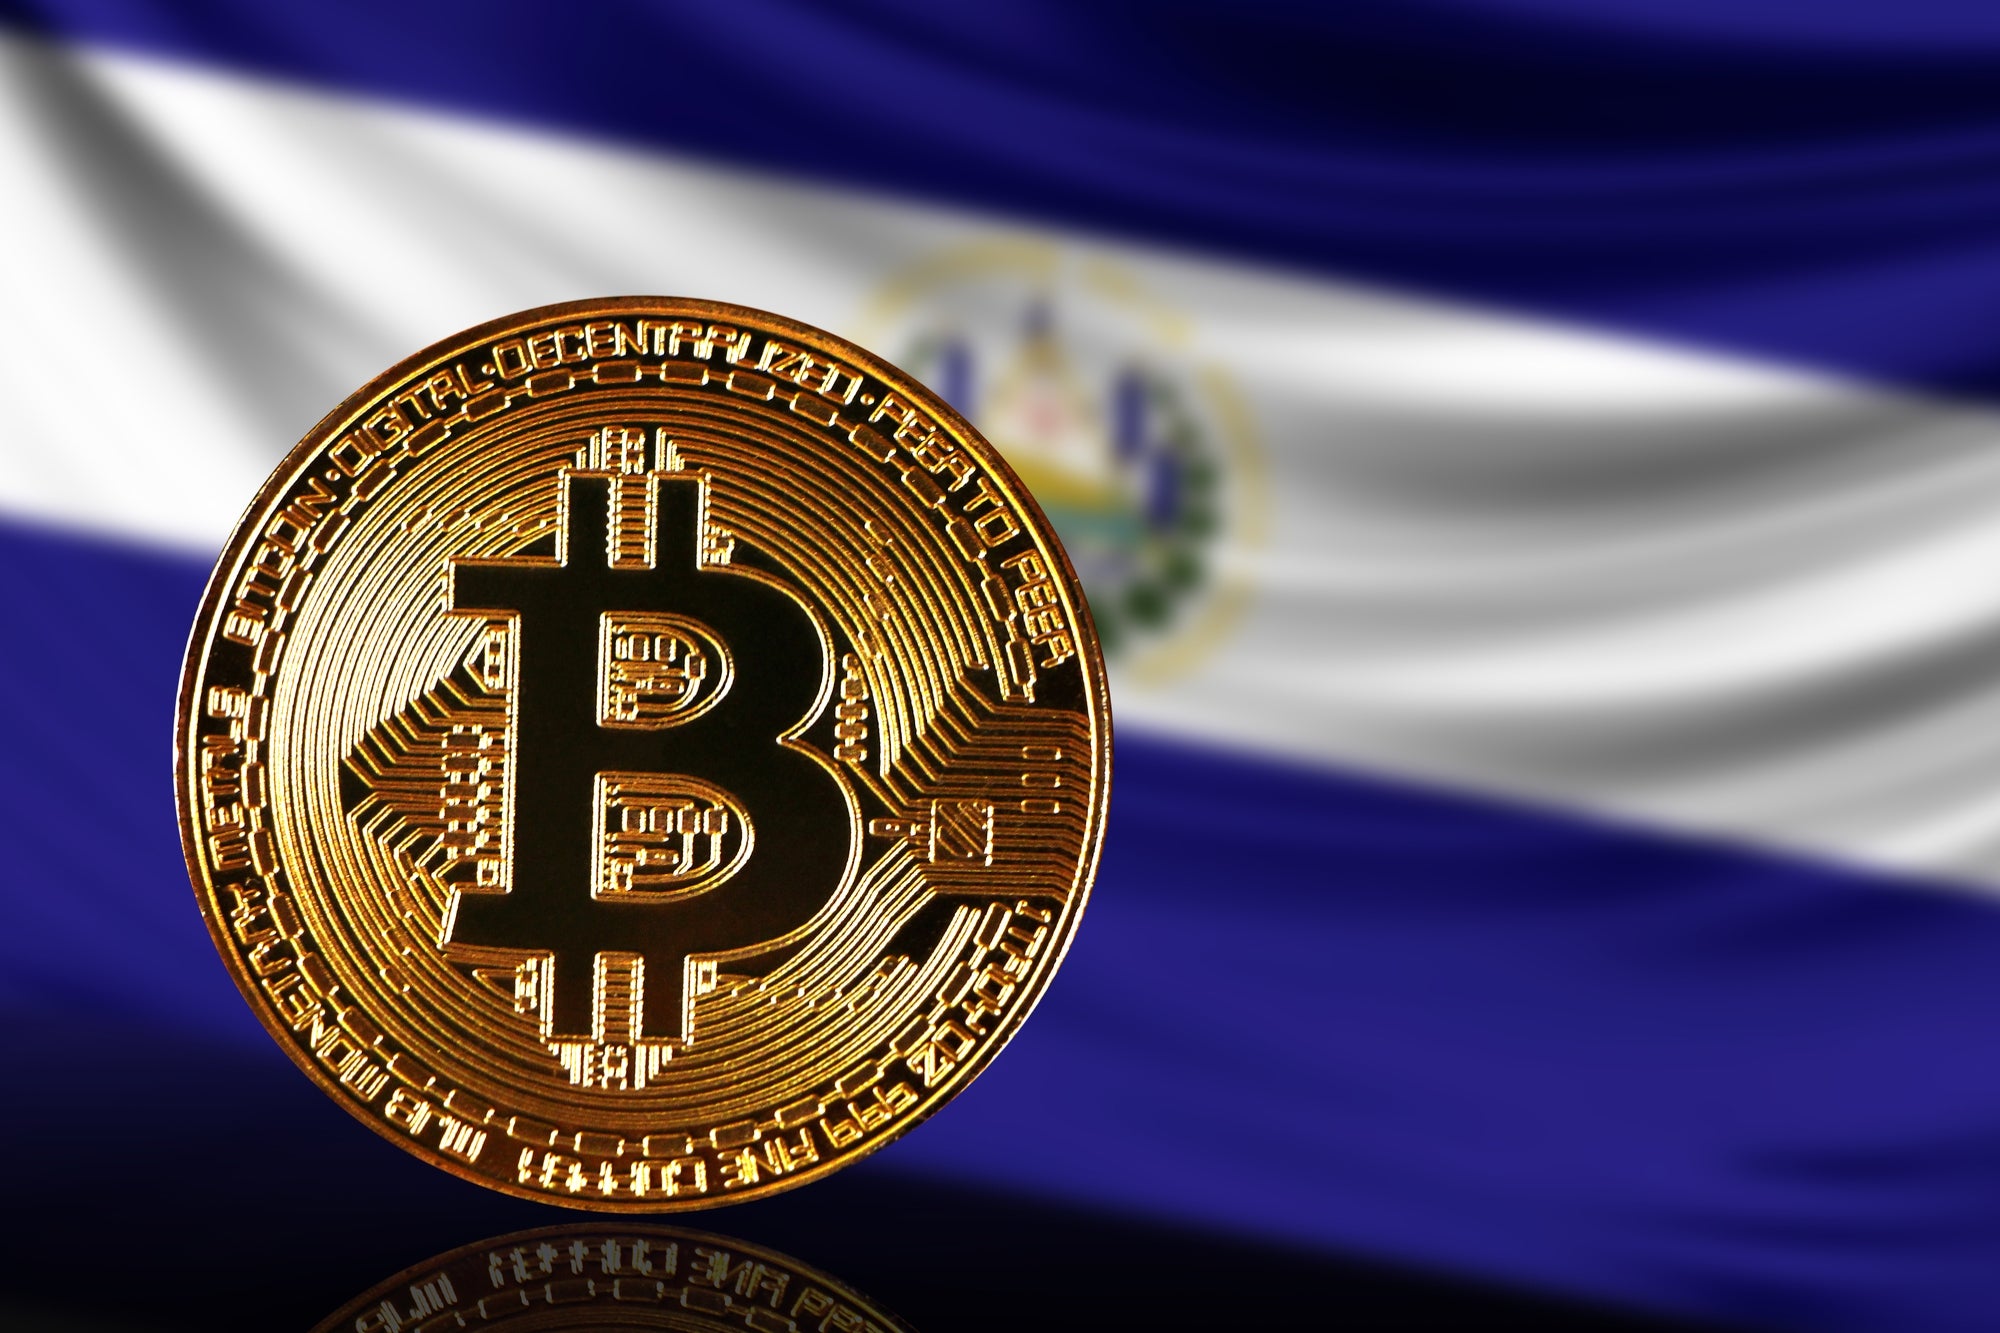 4 potential advantages of the adoption of bitcoin in El Salvador, in